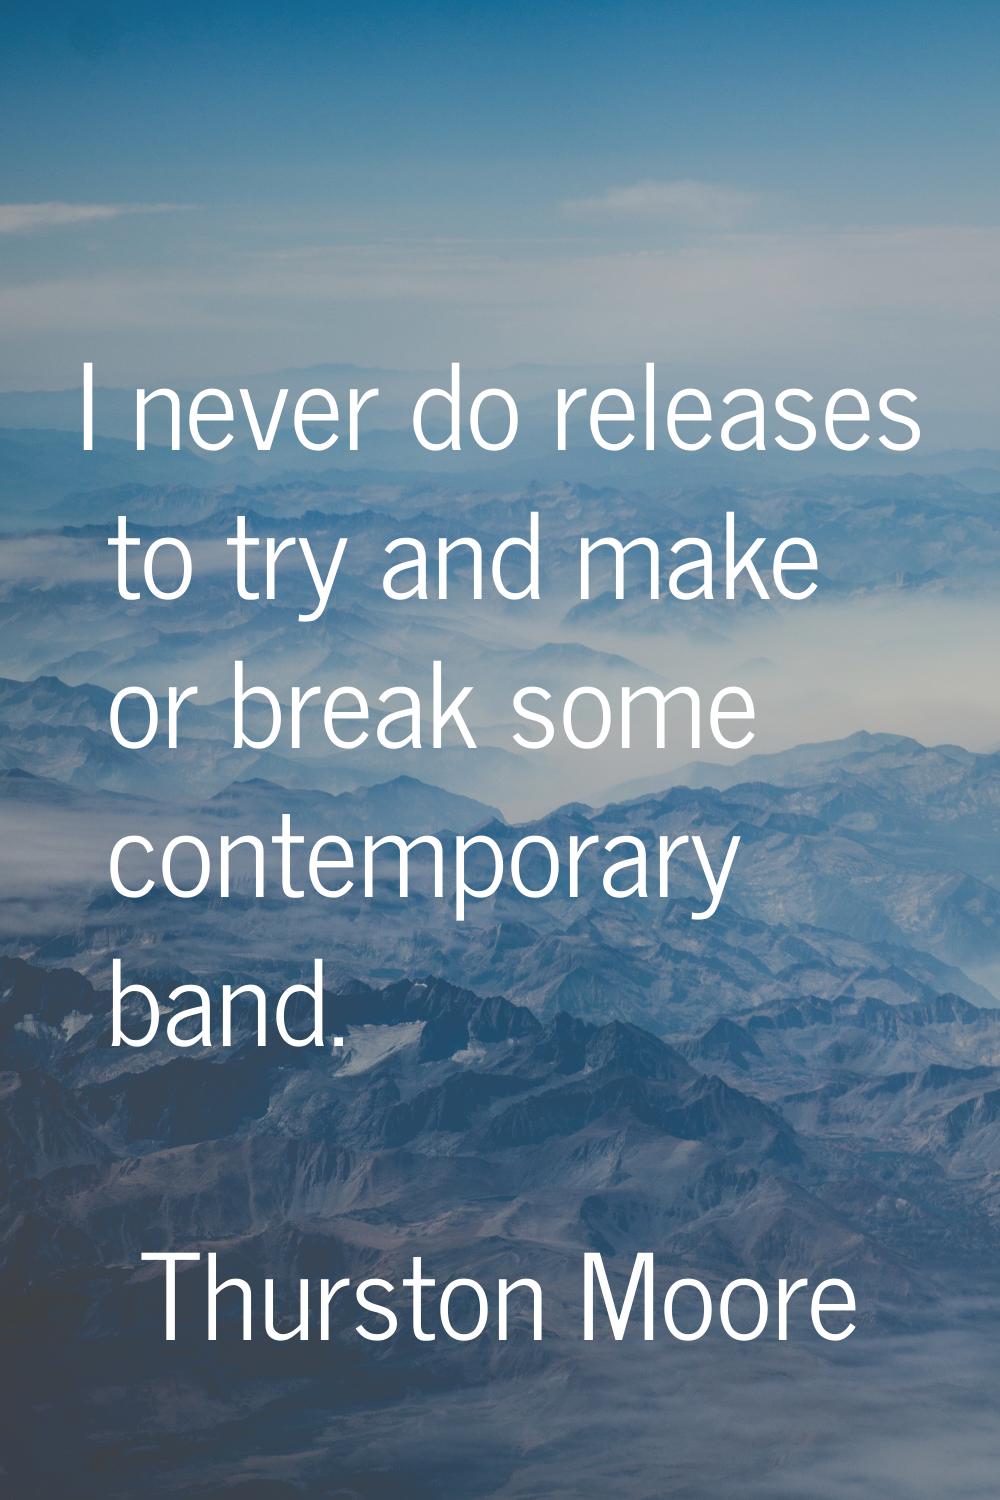 I never do releases to try and make or break some contemporary band.